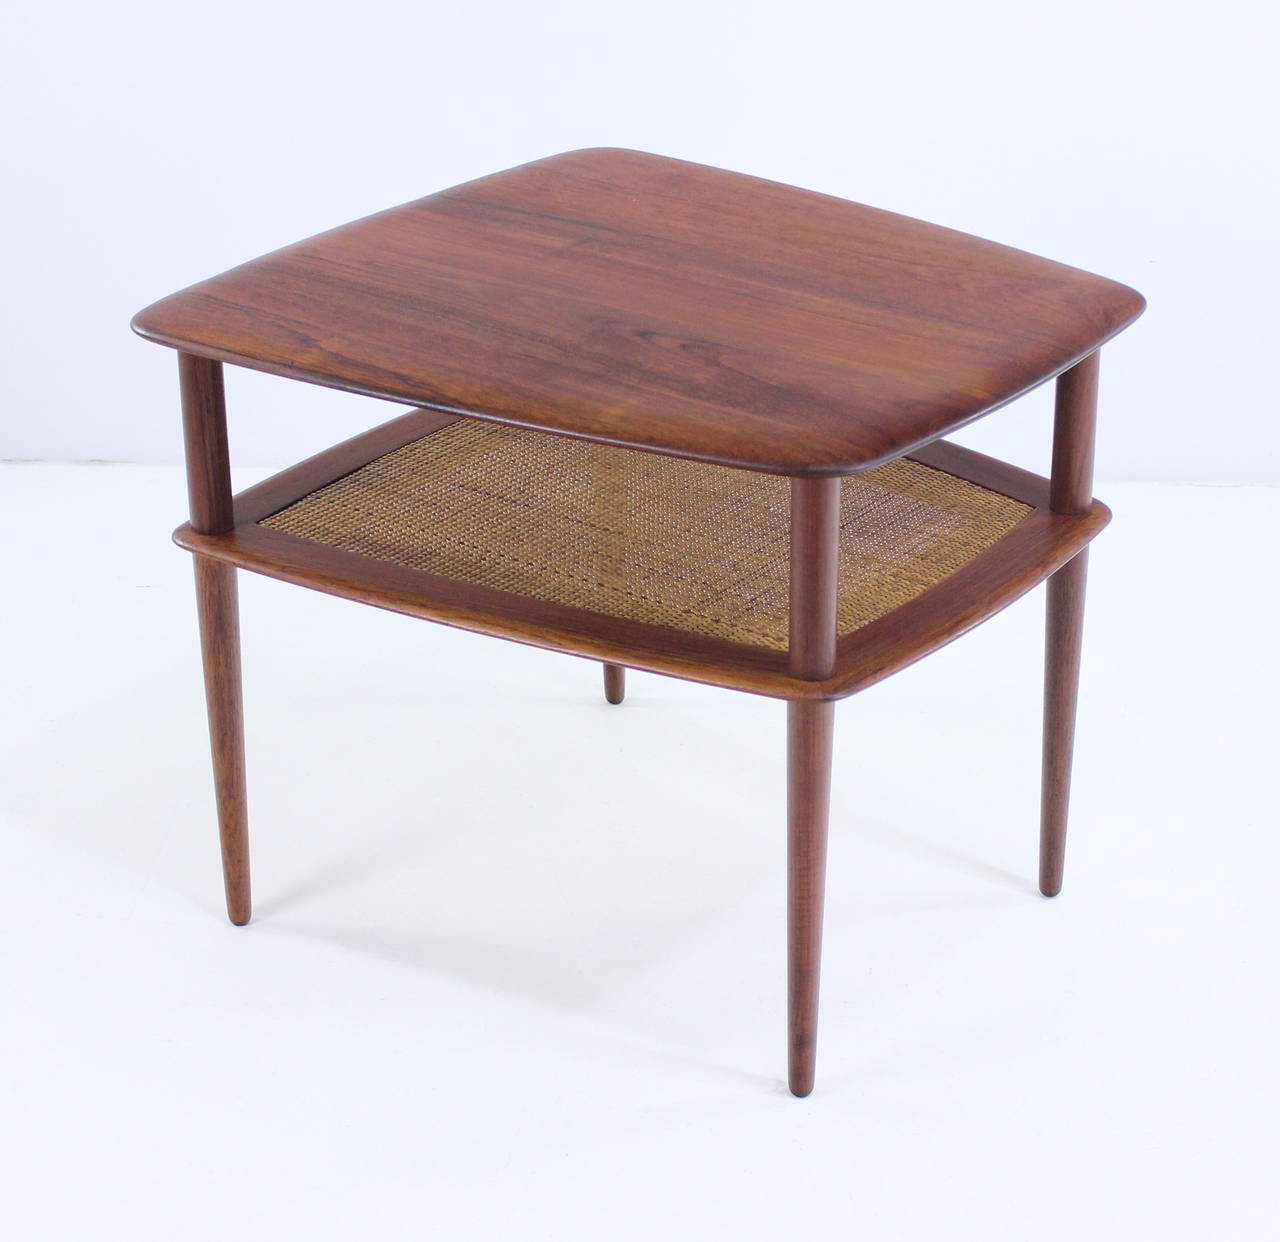 Danish modern end or side table designed by Peter Hvidt.
France and Daverkosen, maker.
Richly grained solid teak. Lower caned magazine or book shelf.
Rare larger size.
Professionally restored and refinished by LookModern.
Matchless quality and